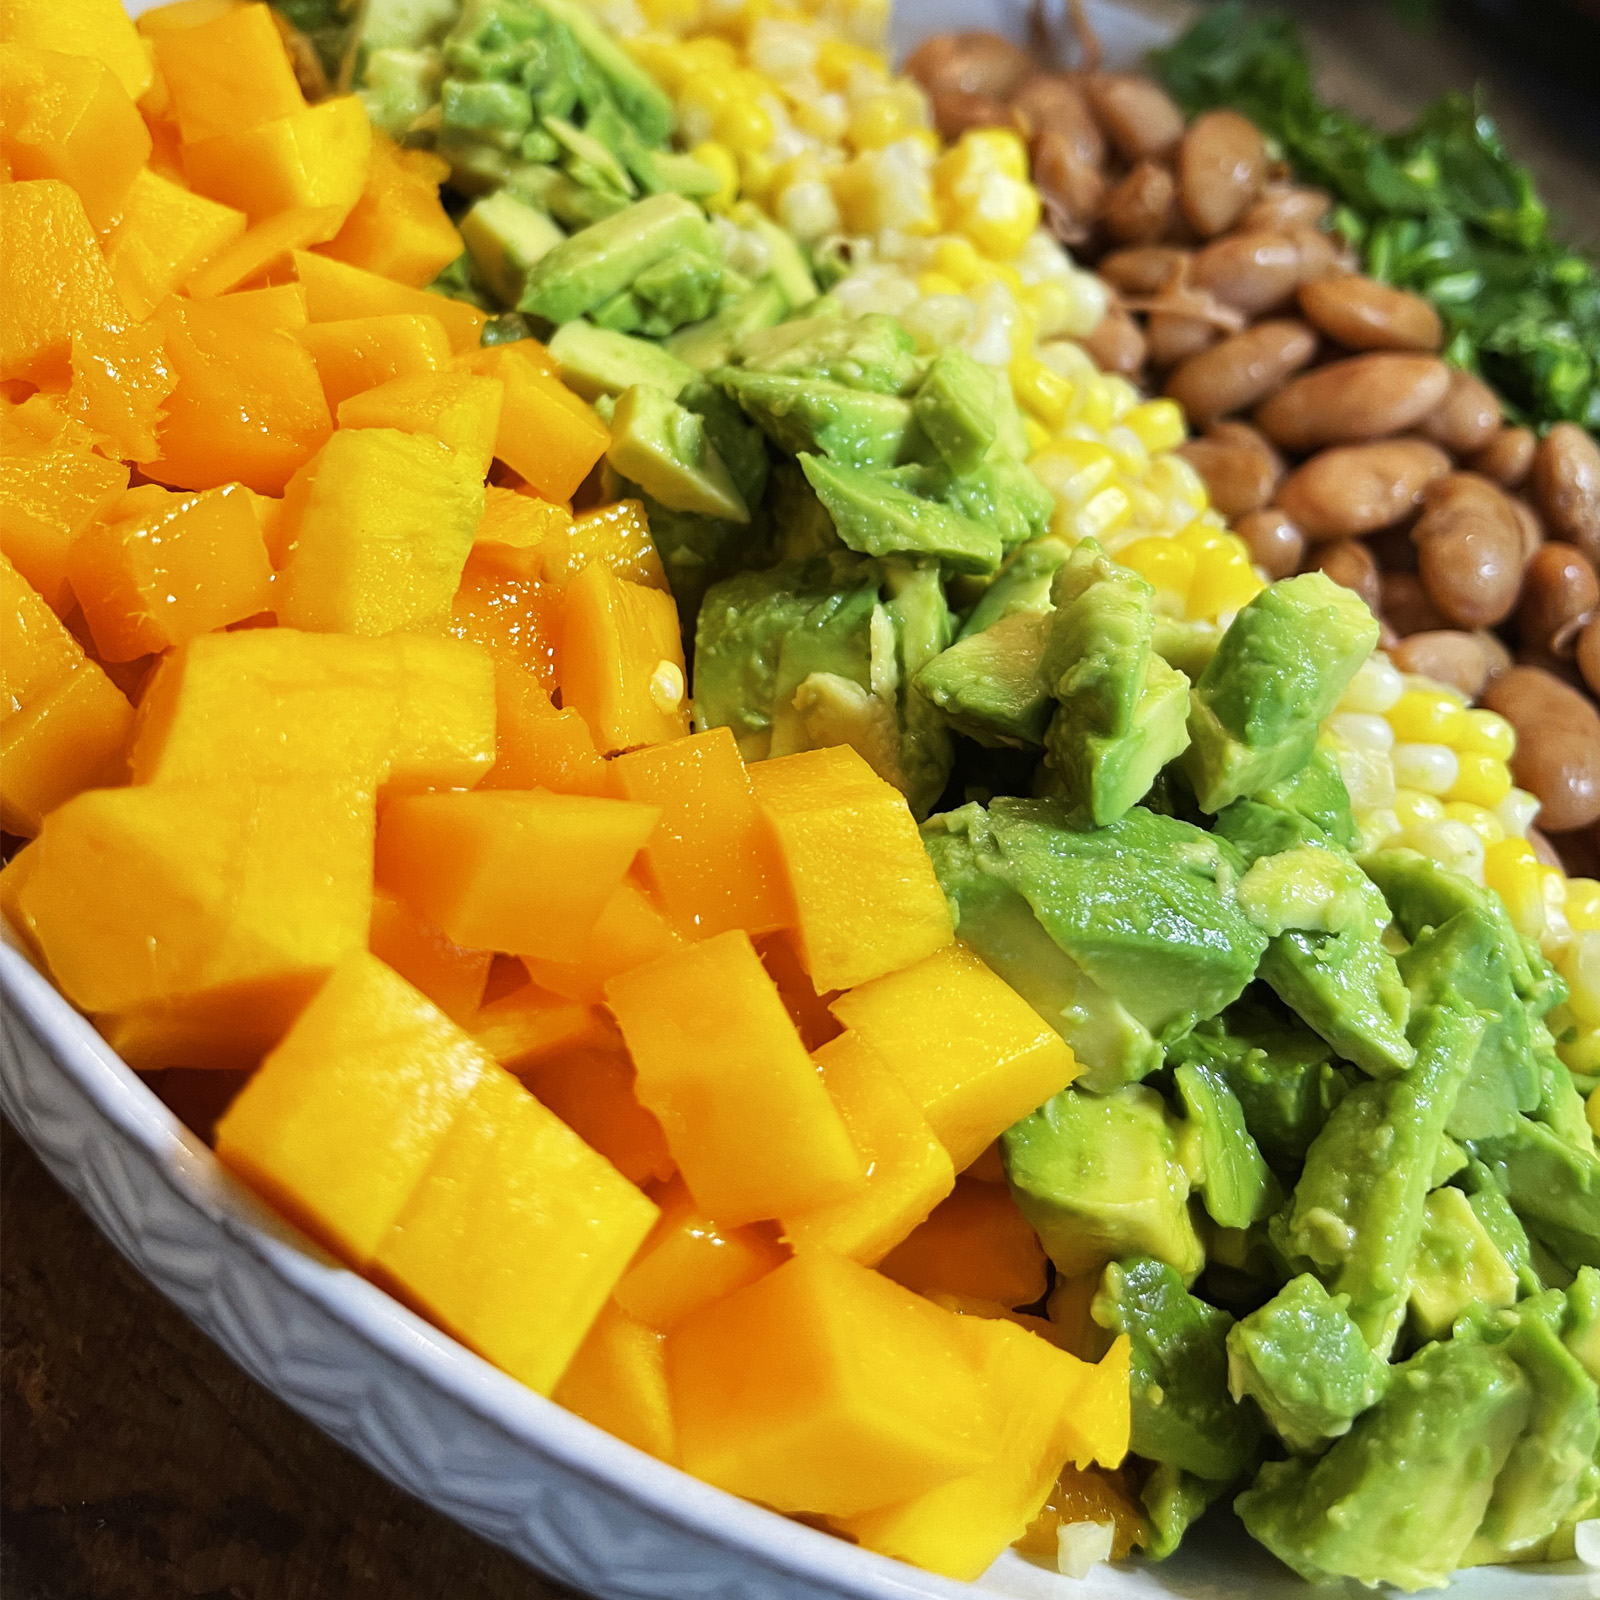 Positive pranic Mango/ Avocado salad with beans, corn, and precisely. Sattvic kitchen, plant-based diet